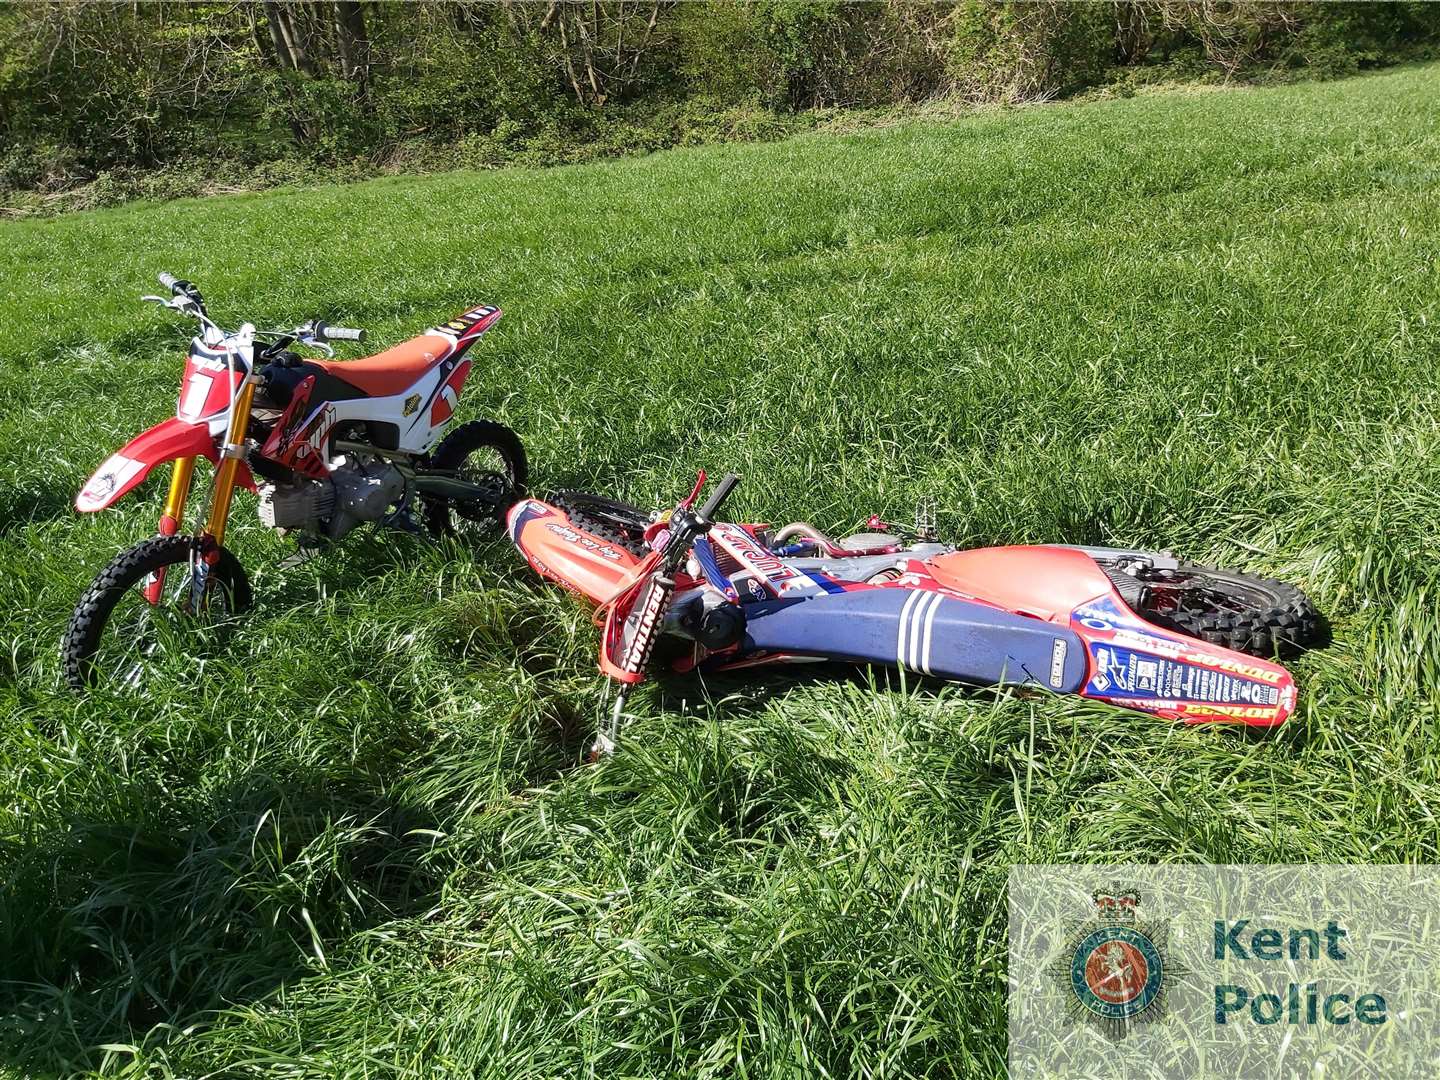 Bike's that were dumped across Maidstone and Medway